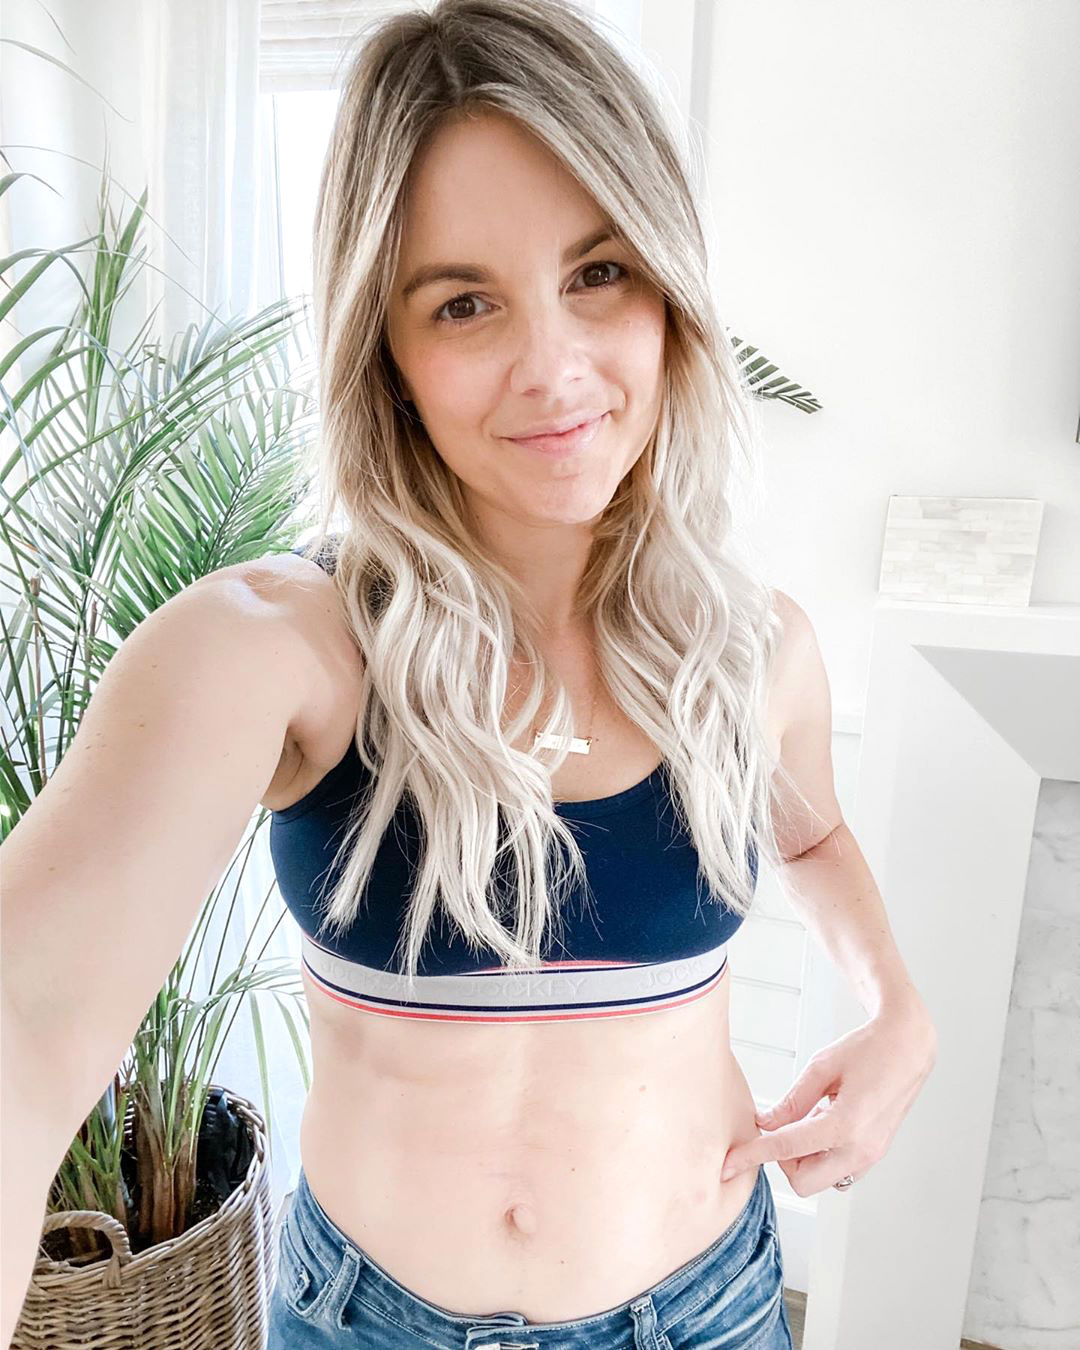 Bachelorette star Ali Fedotowsky shows off her slender figure in